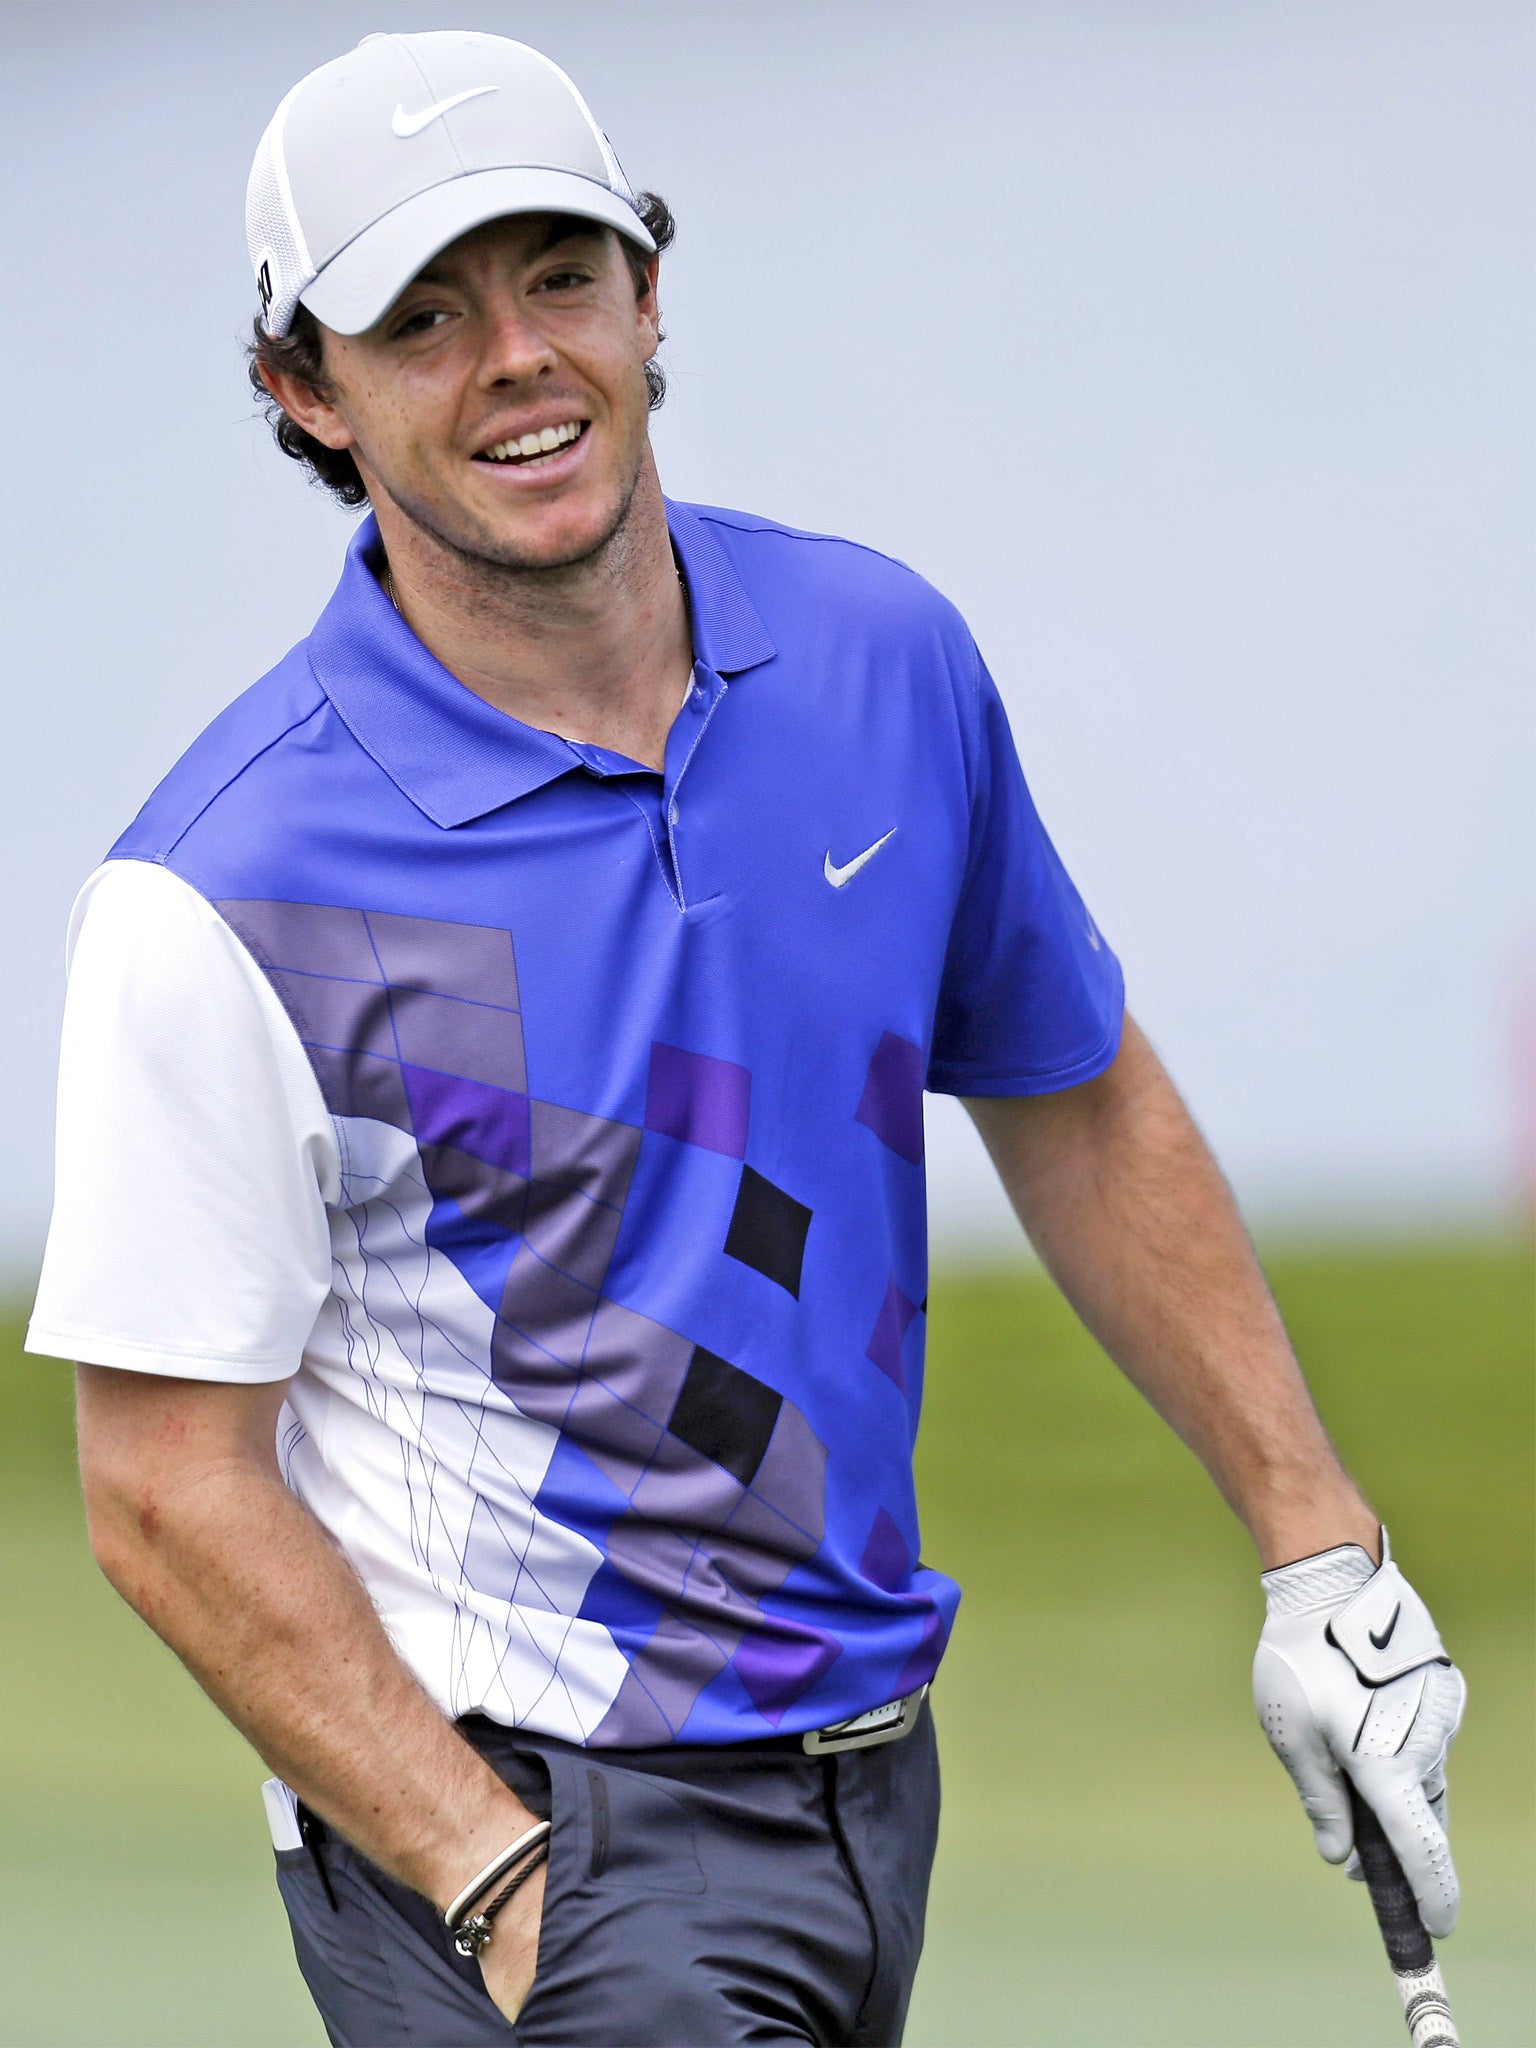 Rory McIlroy looks relaxed as he takes to the practice ground at Sawgrass yesterday